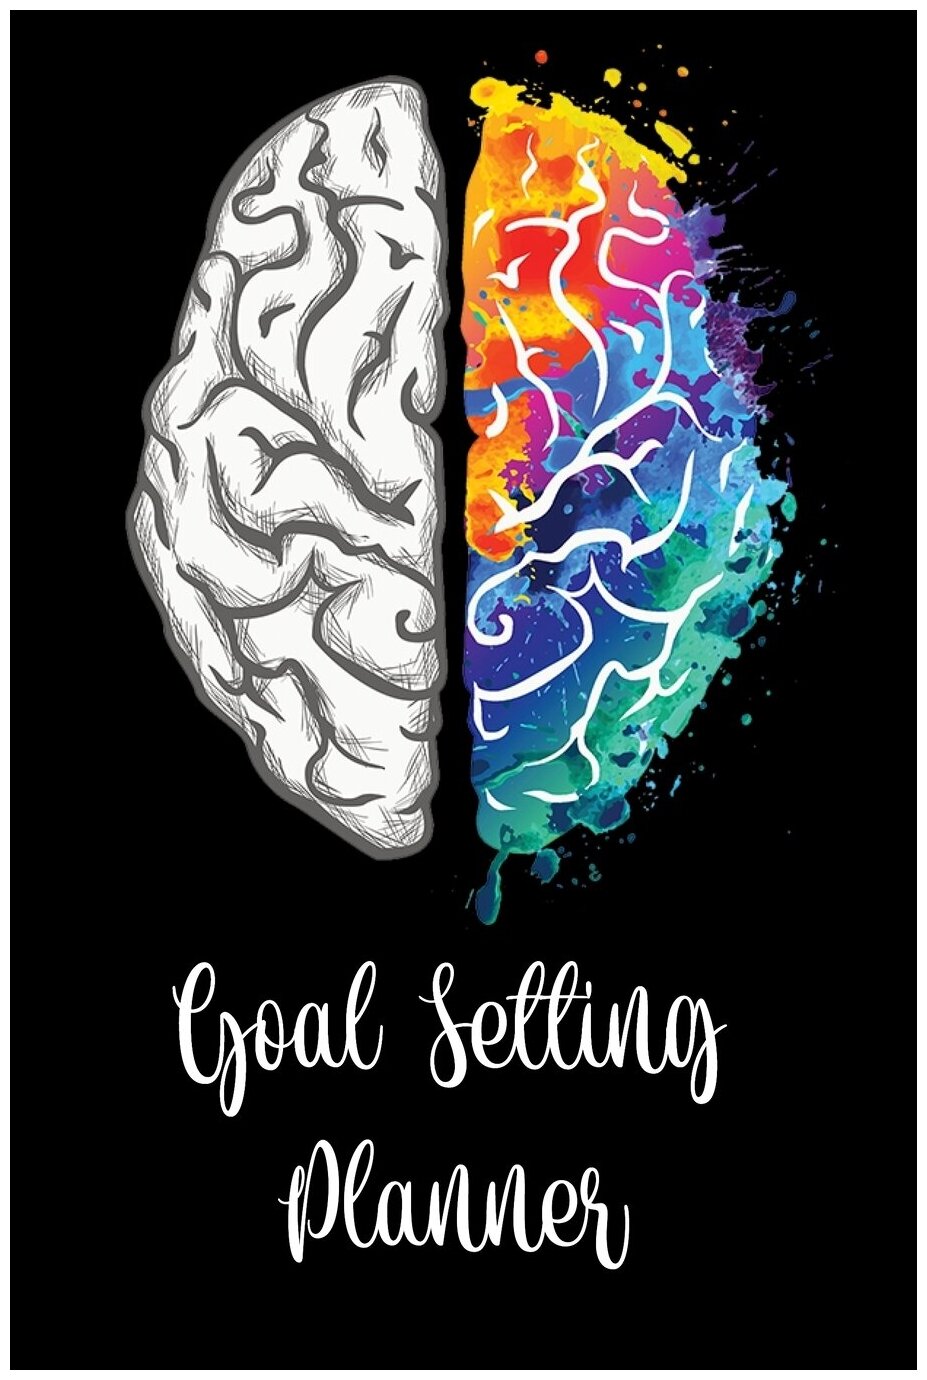 Goal Setting Planner. A Daily Life Planner and Organizer to Hit Your Goals & Live Happier | A Productivity Planner and Motivational Notebook